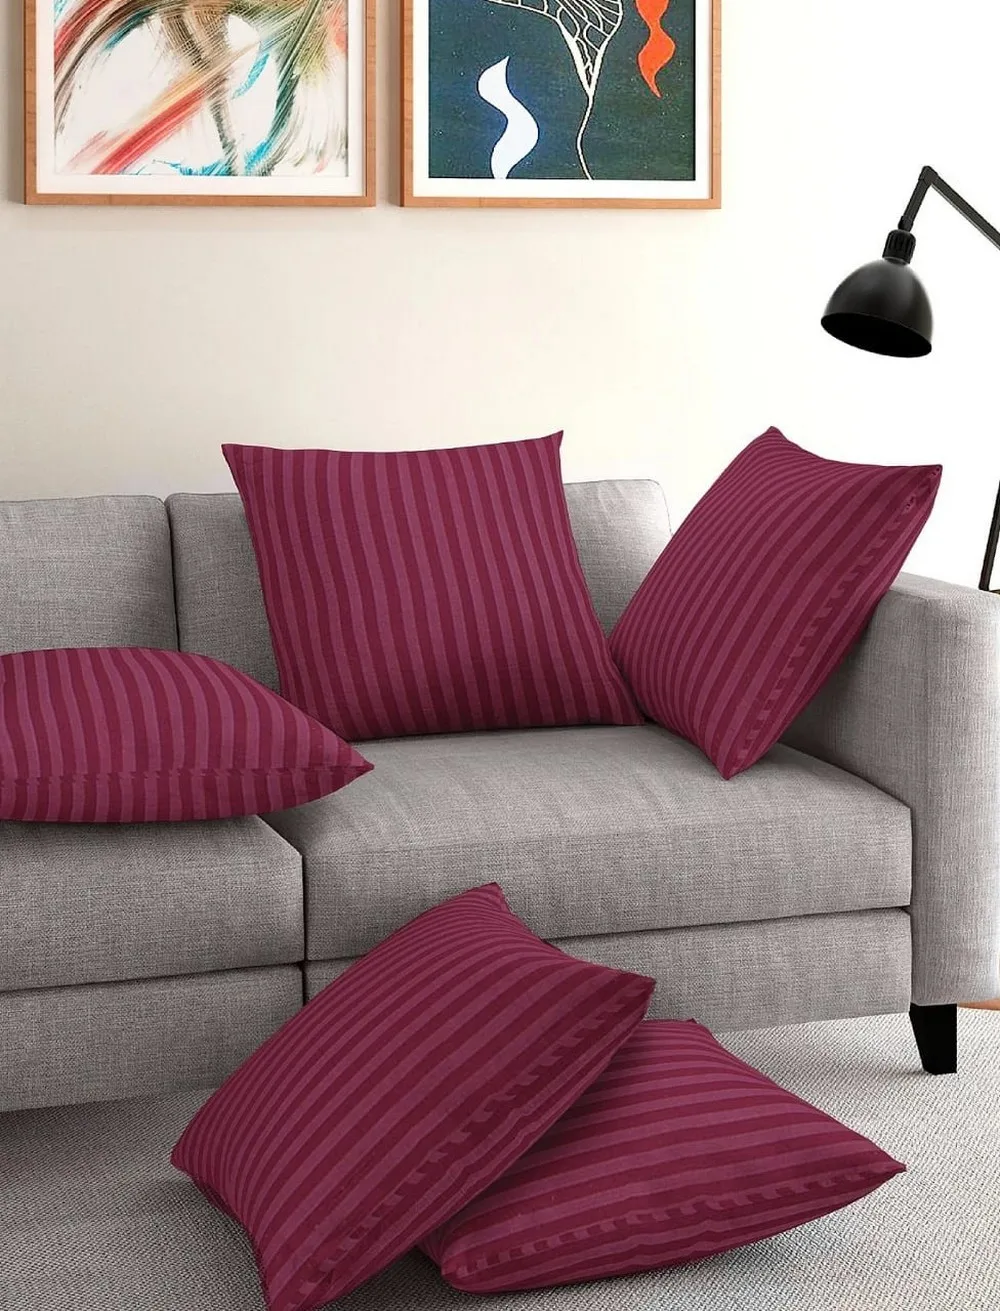 Cushion cover striped, glace cotton, 16x16, Set of 5, magenta